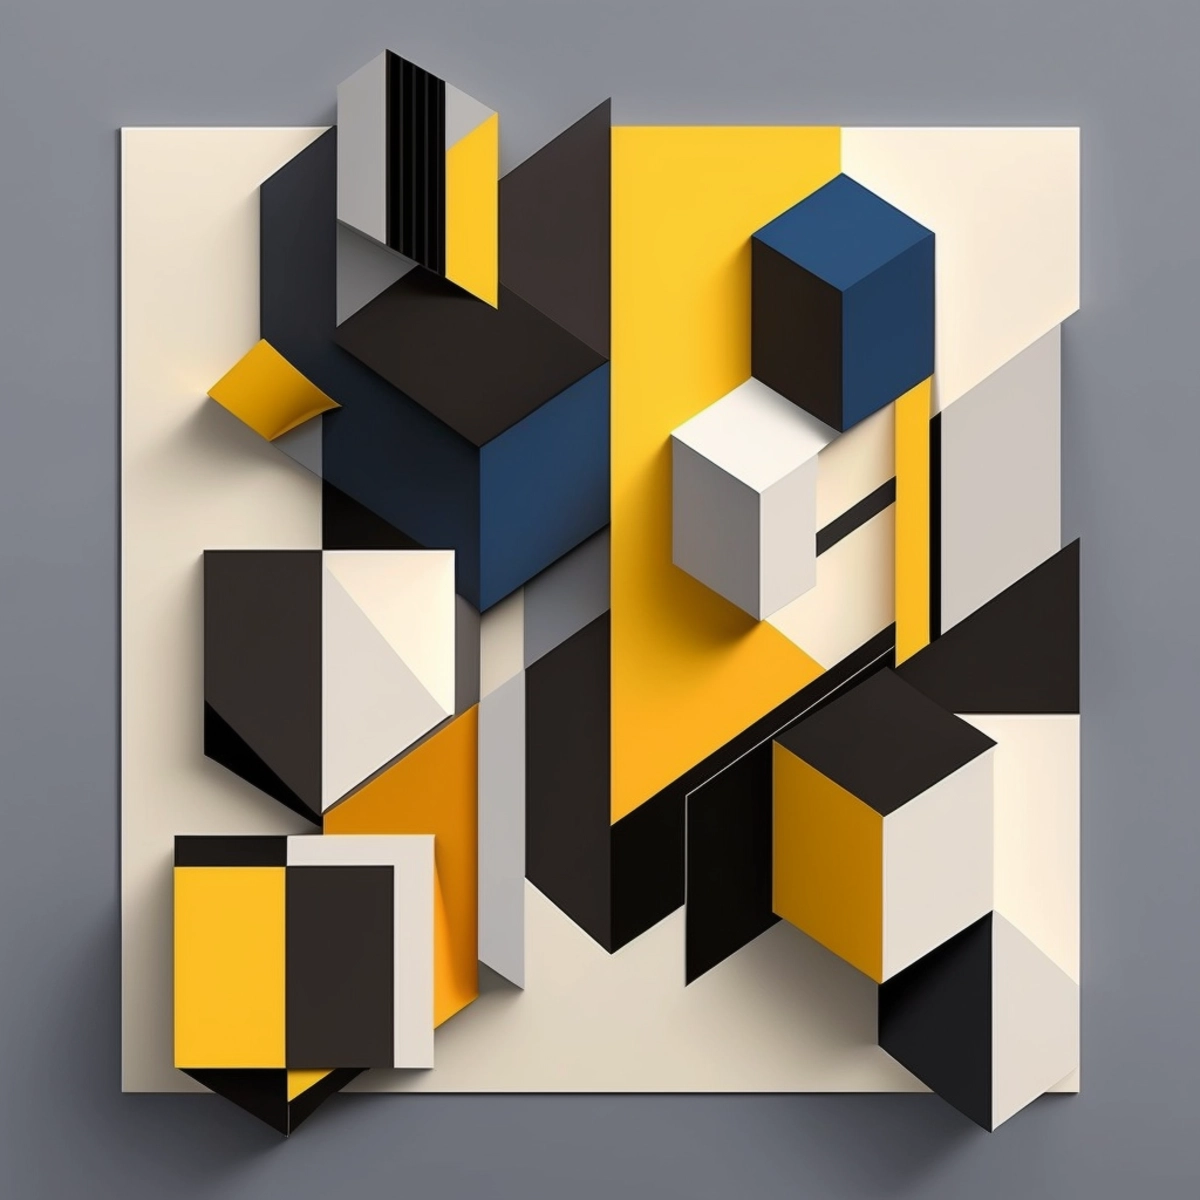 A geometric, minimalist composition with intersecting lines and simple shapes, in a bold, high-contrast color palette